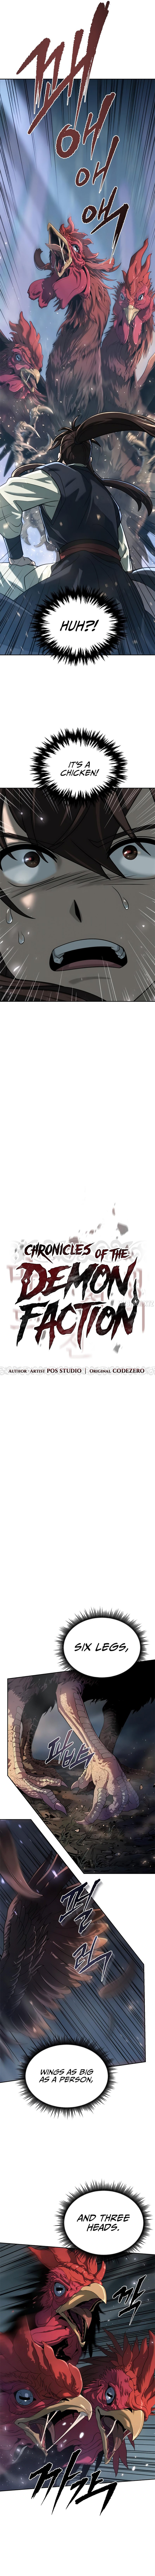 chronicles-of-the-demon-faction-chap-11-5